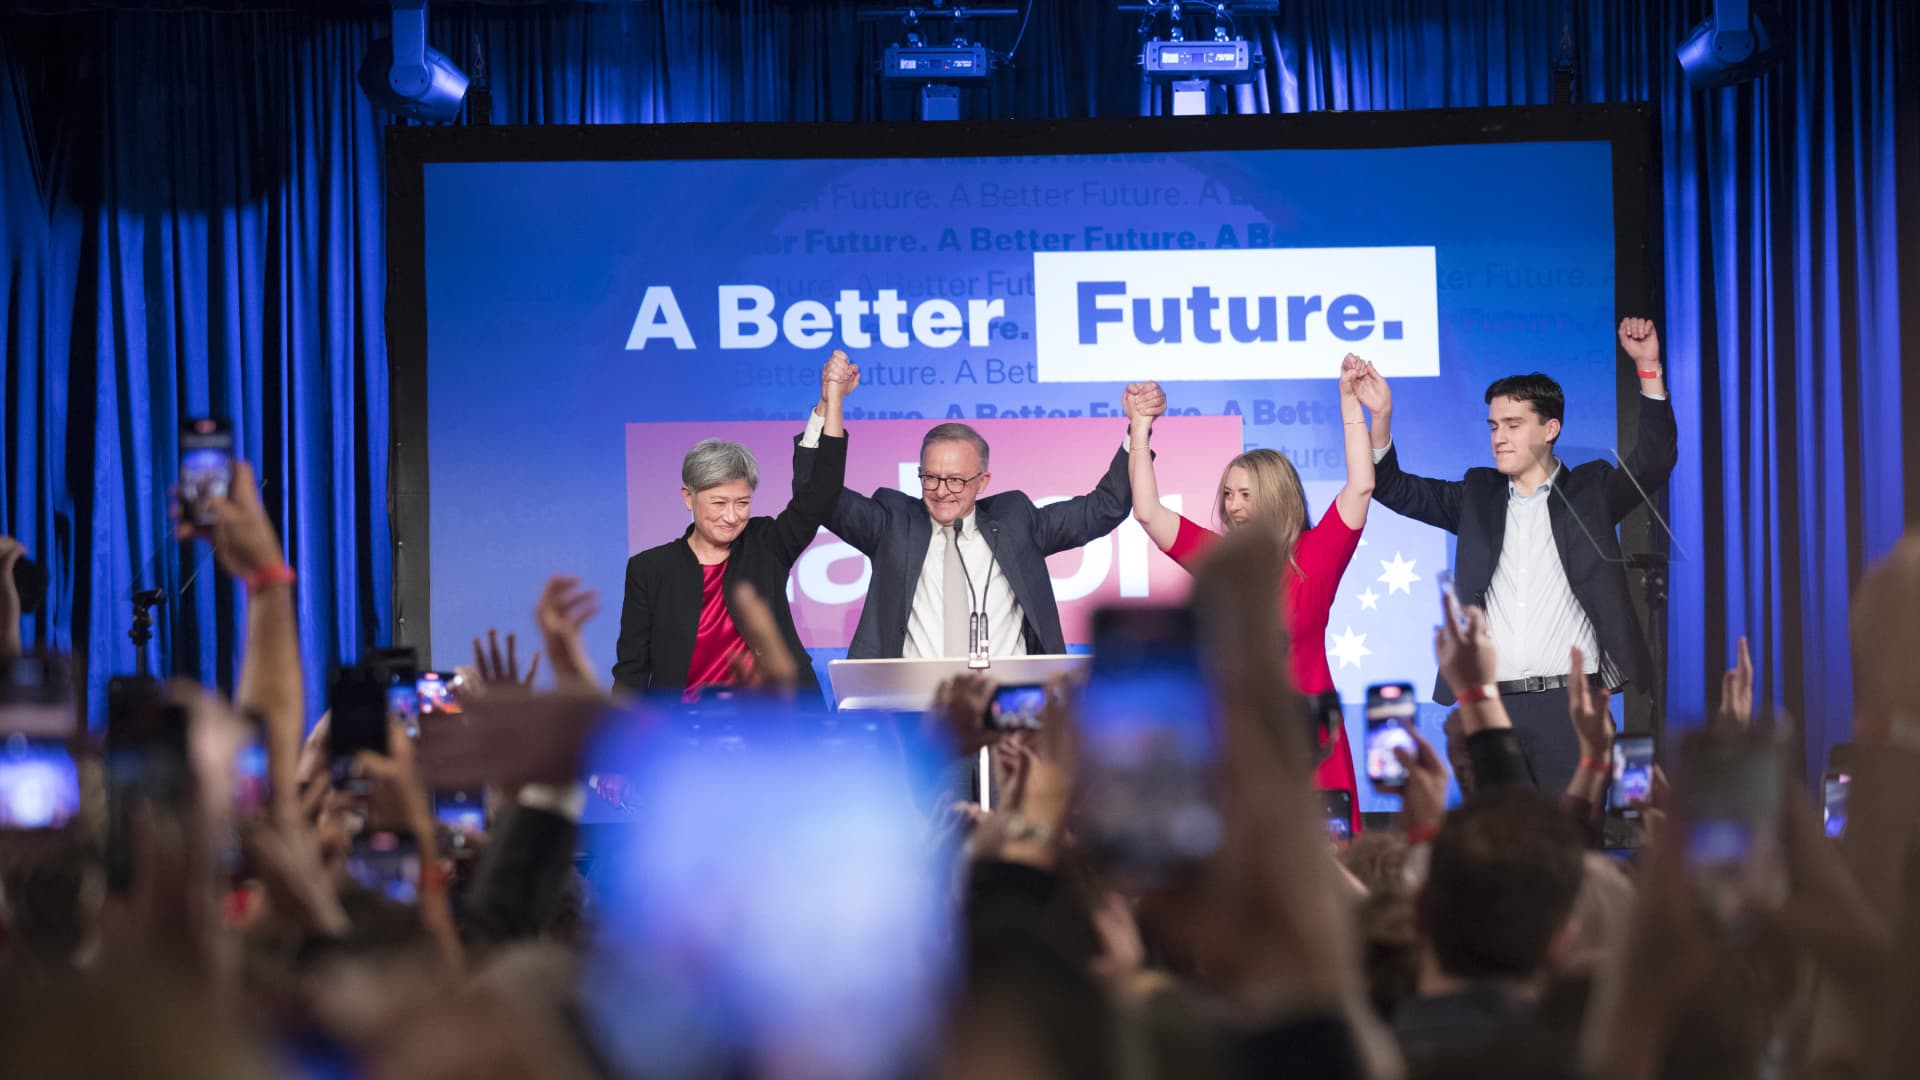 Anthony Albanese, leader of the Labor Party, stands on stage with his partner Jodie Haydon, his son Nathan Albanese, and Penny Wong, Australia's shadow foreign minister, during the party's election night event in Australia, on May 21, 2022. Businesses in Australia and their investors globally will remain wary of how the new Australian Labor government rolls out its climate change policies amid concerns it will come under pressure to strike a new deal to stretch its emissions reduction targets, analysts say.